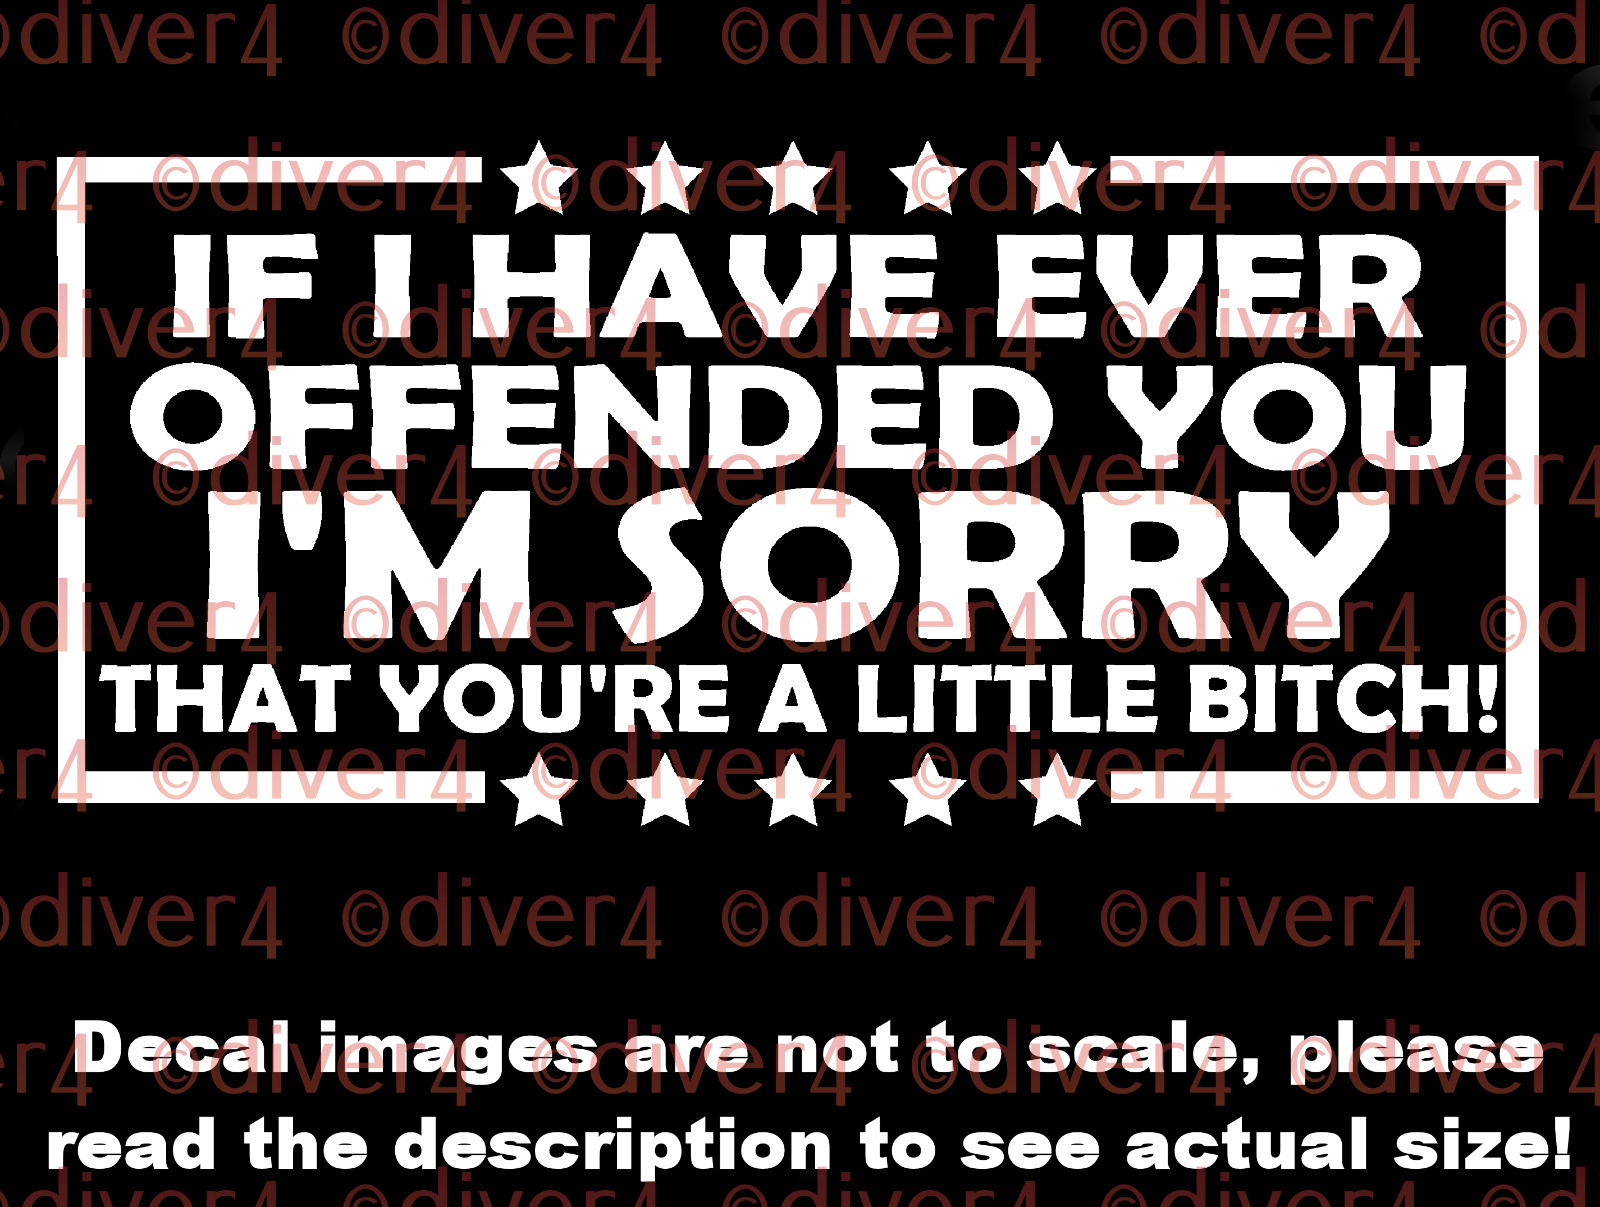 If I've Ever Offended You I'm Sorry You're a Little B$ch Vinyl Decal US MADE